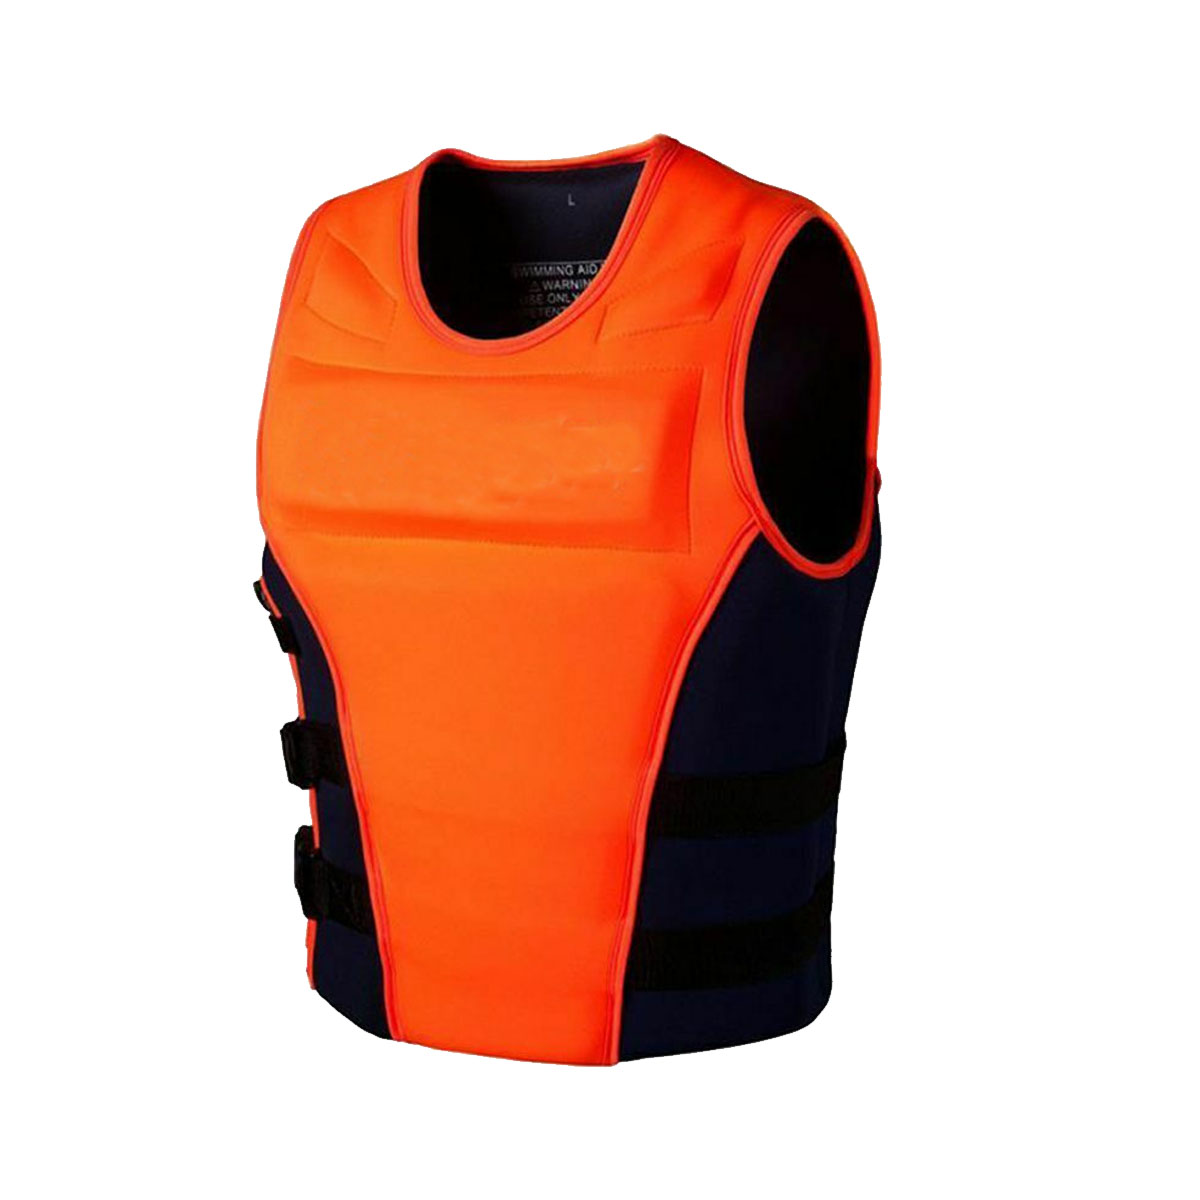 Outdoor-Rafting-Life-Jacket-for-Adult-Swimming-Snorkeling-Wear-Professional-Surfing-Aid-Life-Vest-1748600-7